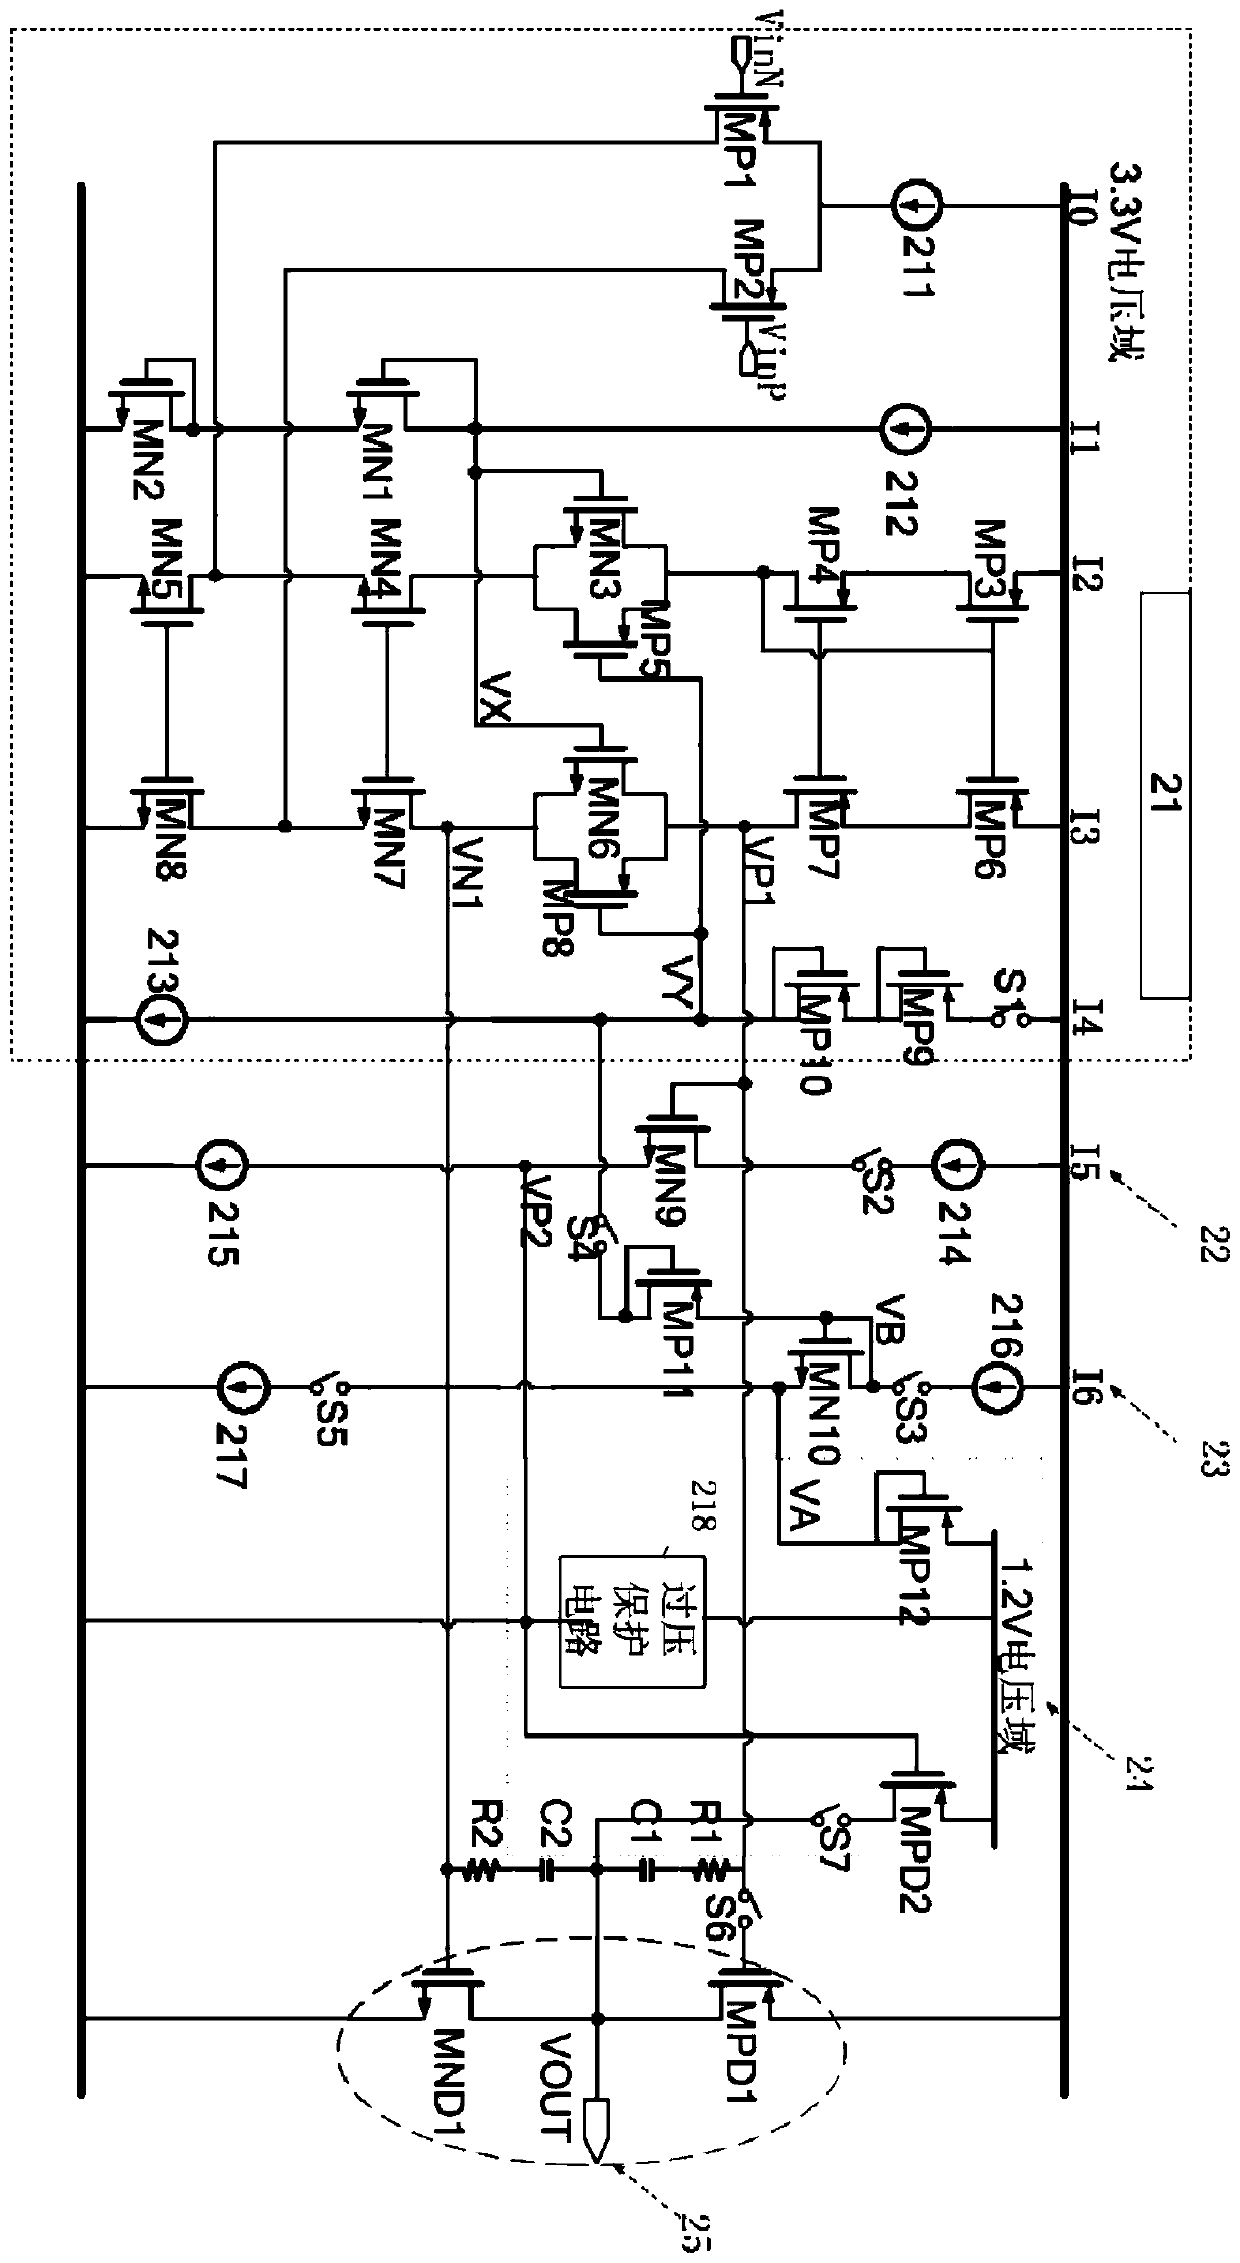 A kind of dual voltage domain driving operation circuit